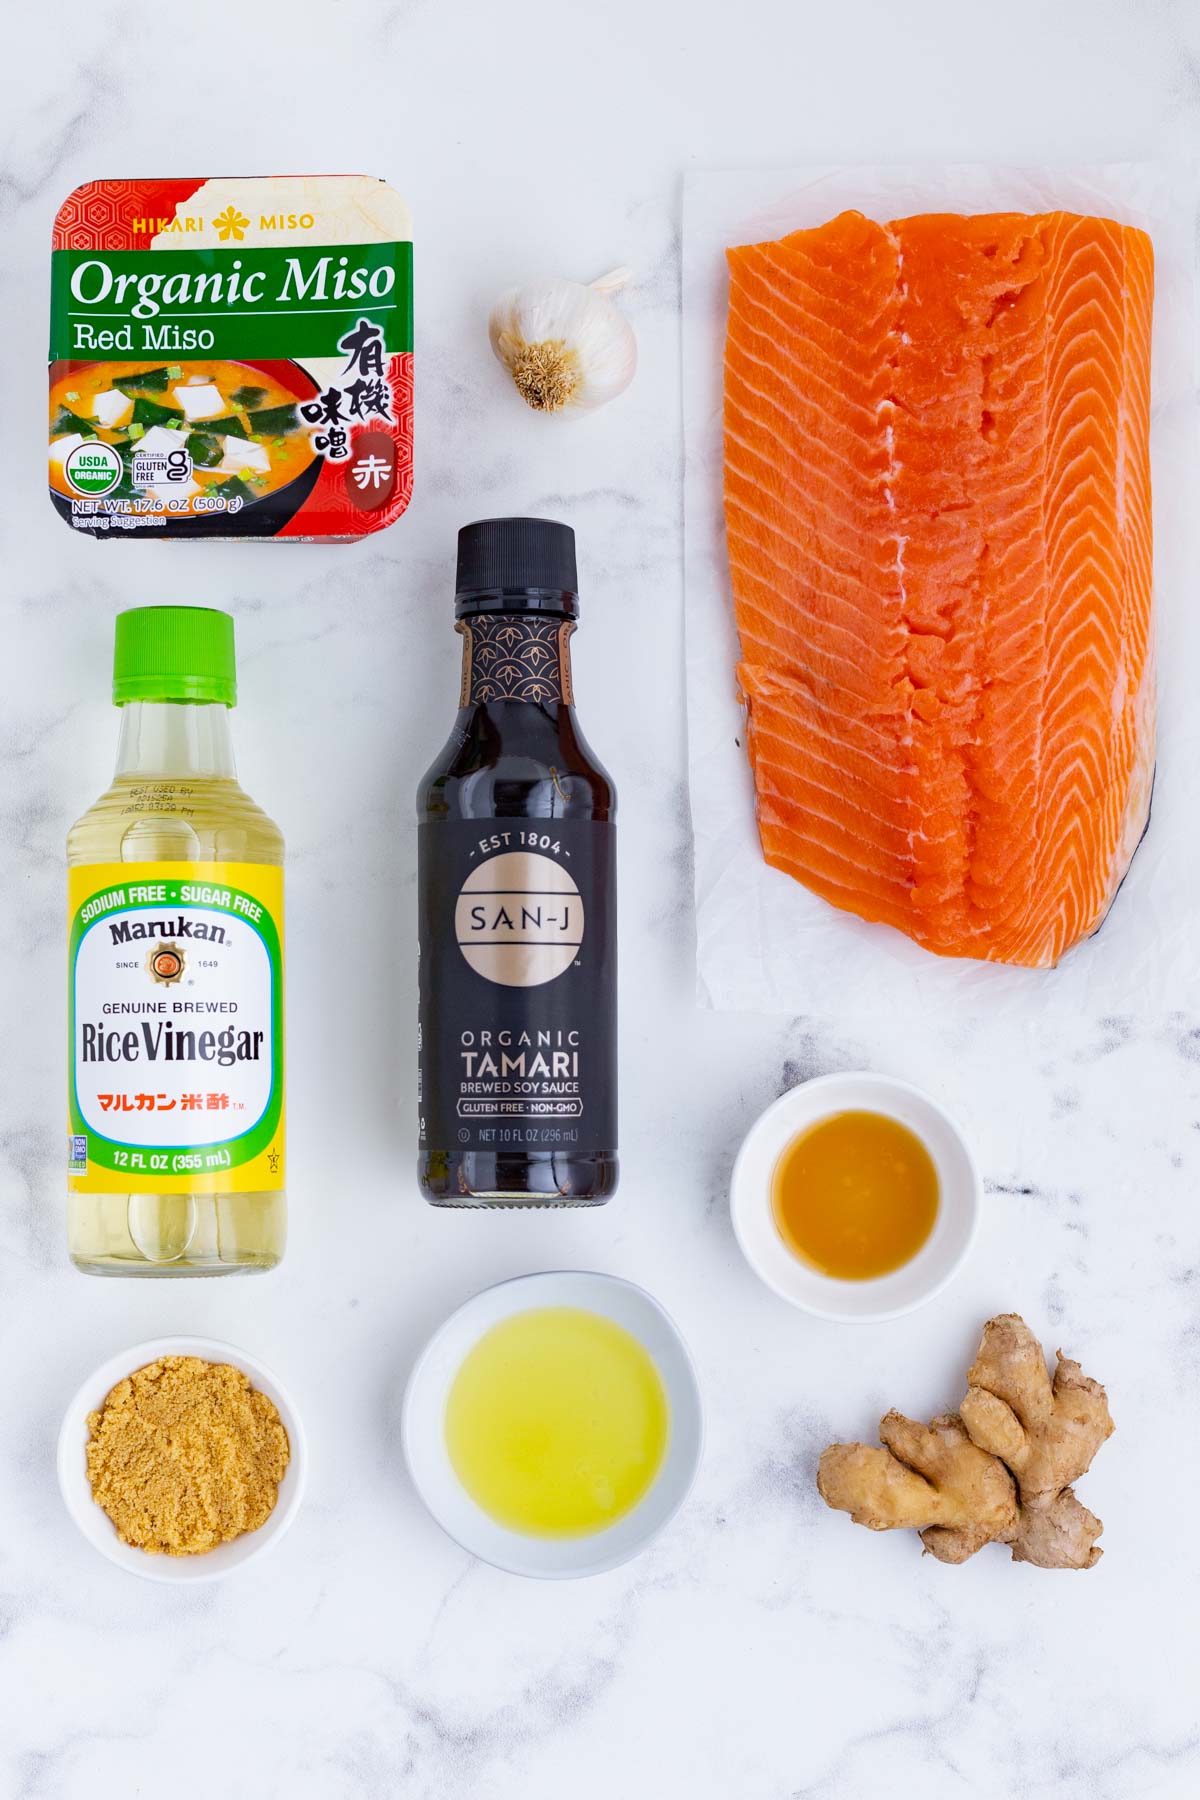 Salmon, soy sauce, miso paste, garlic, ginger, oil, and seasonings are the ingredients for this dish.